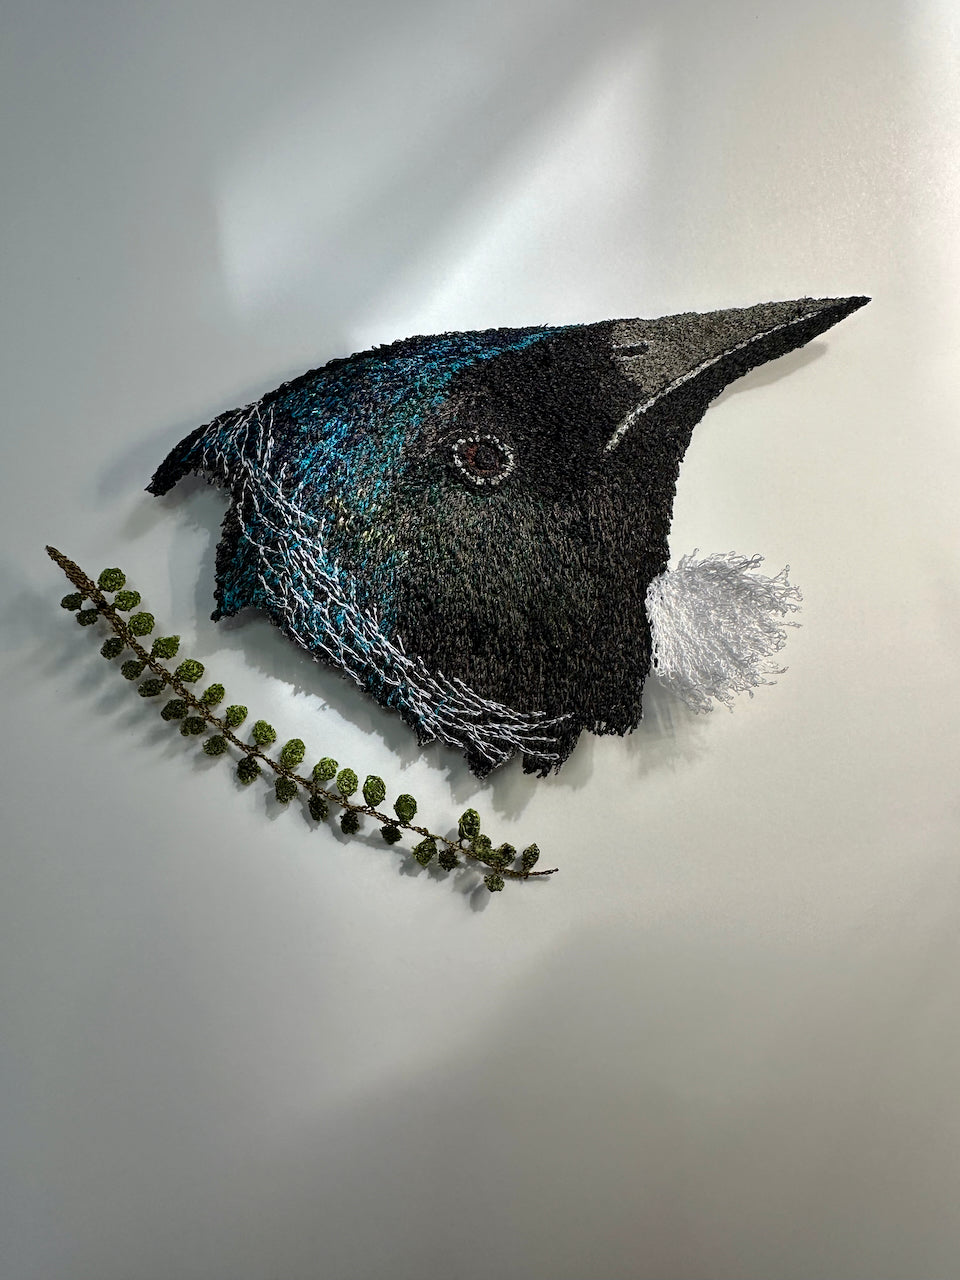 Tui and Kowhai leaf sculptural embroidery #2.